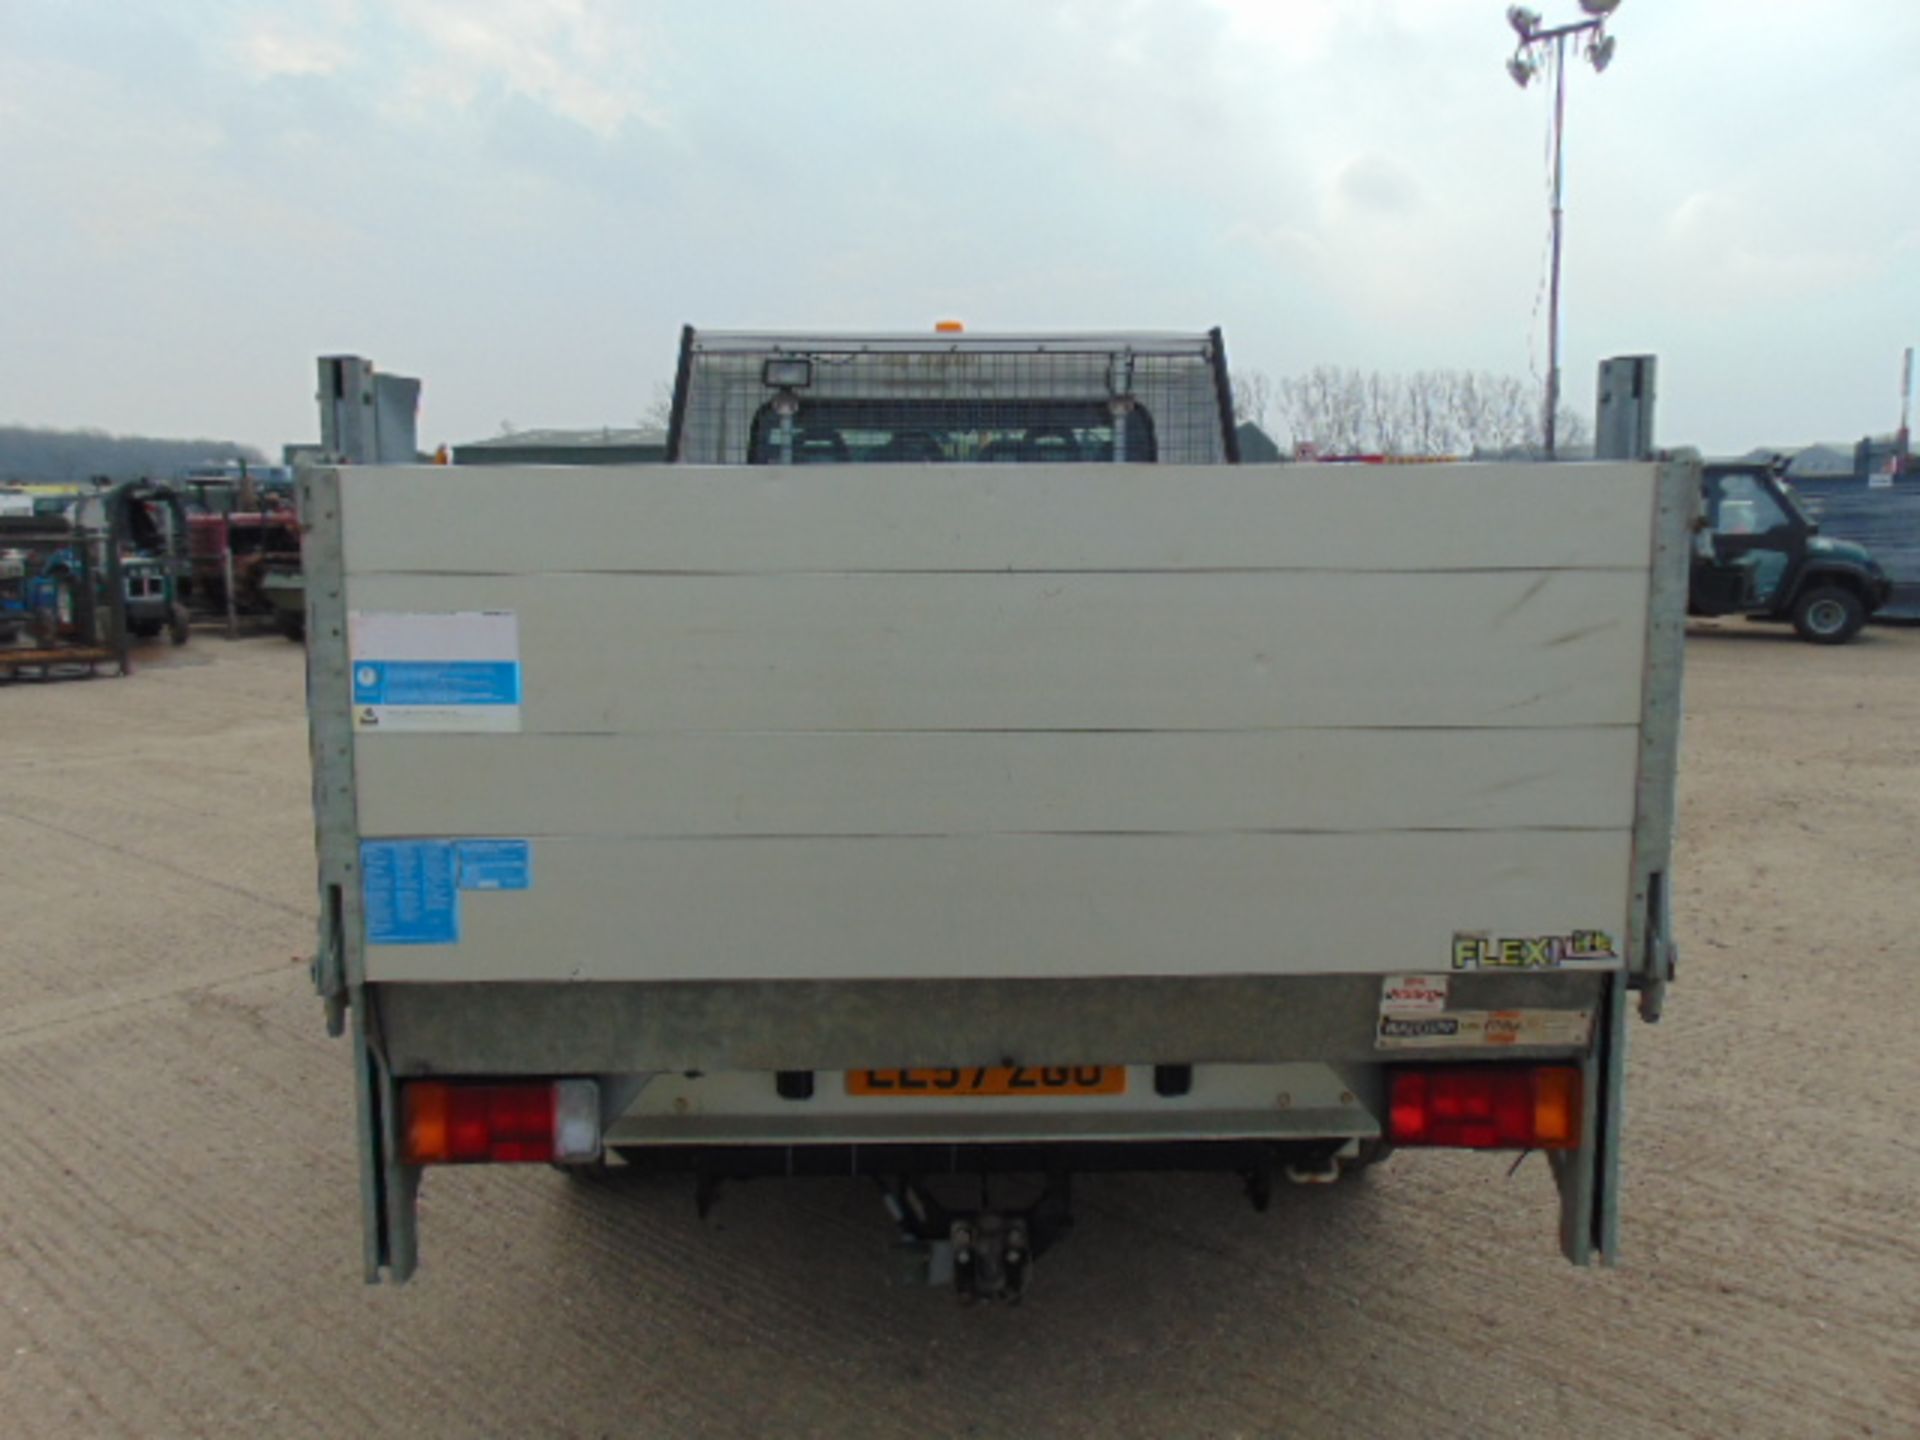 Citroen Relay 7 Seater Double Cab Dropside Pickup with 500kg Ratcliff Palfinger Tail Lift - Image 6 of 27